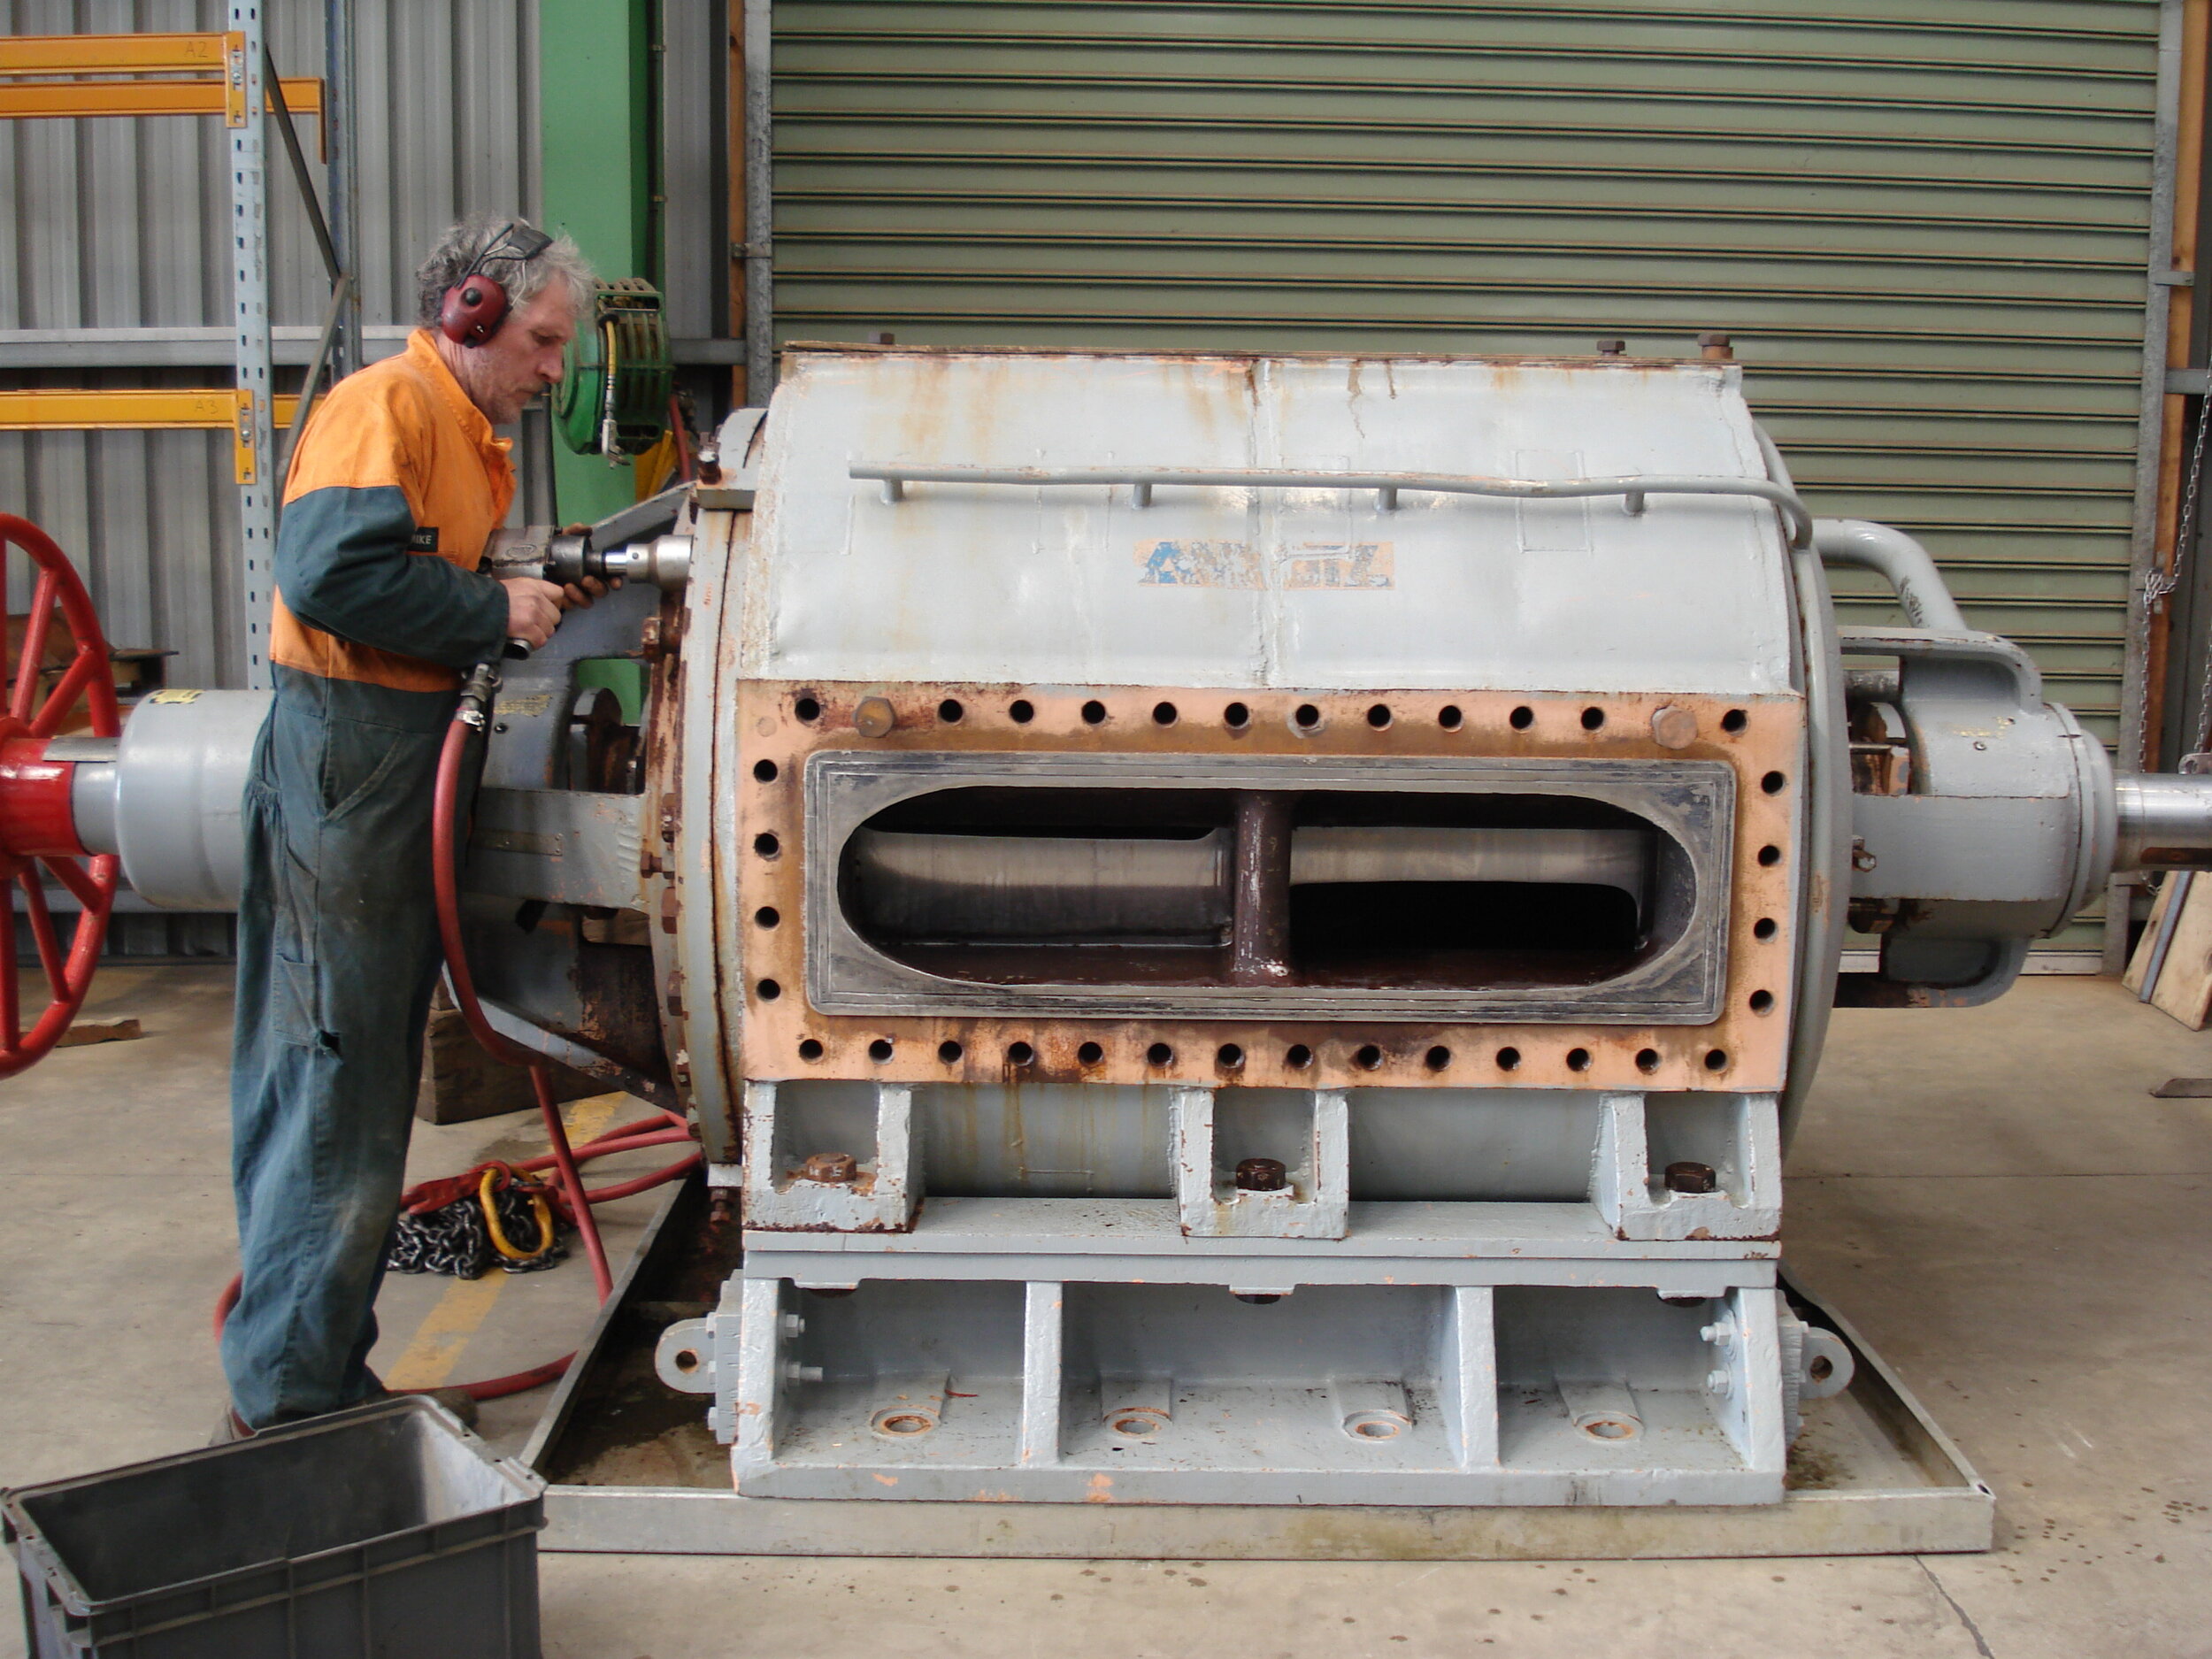   Refurbishment of a high pressure feeder that feeds chip into the digesters for pulp and paper manufacture 